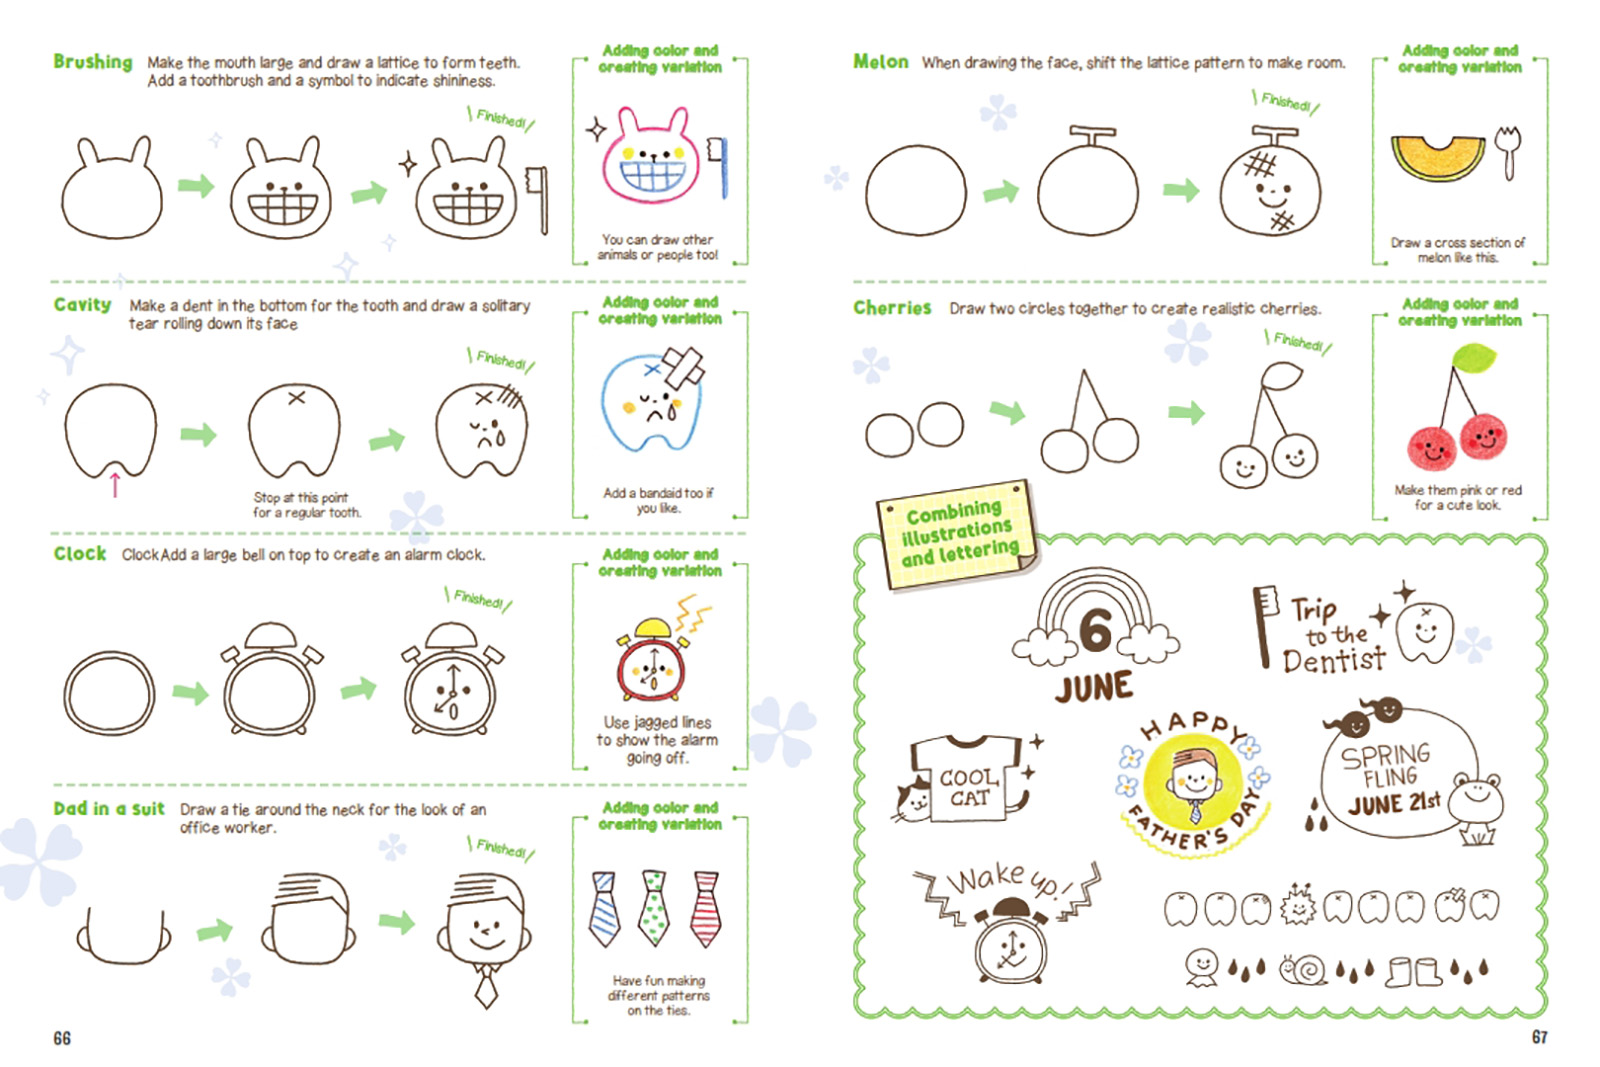 How to Draw Cute Doodles and Illustrations